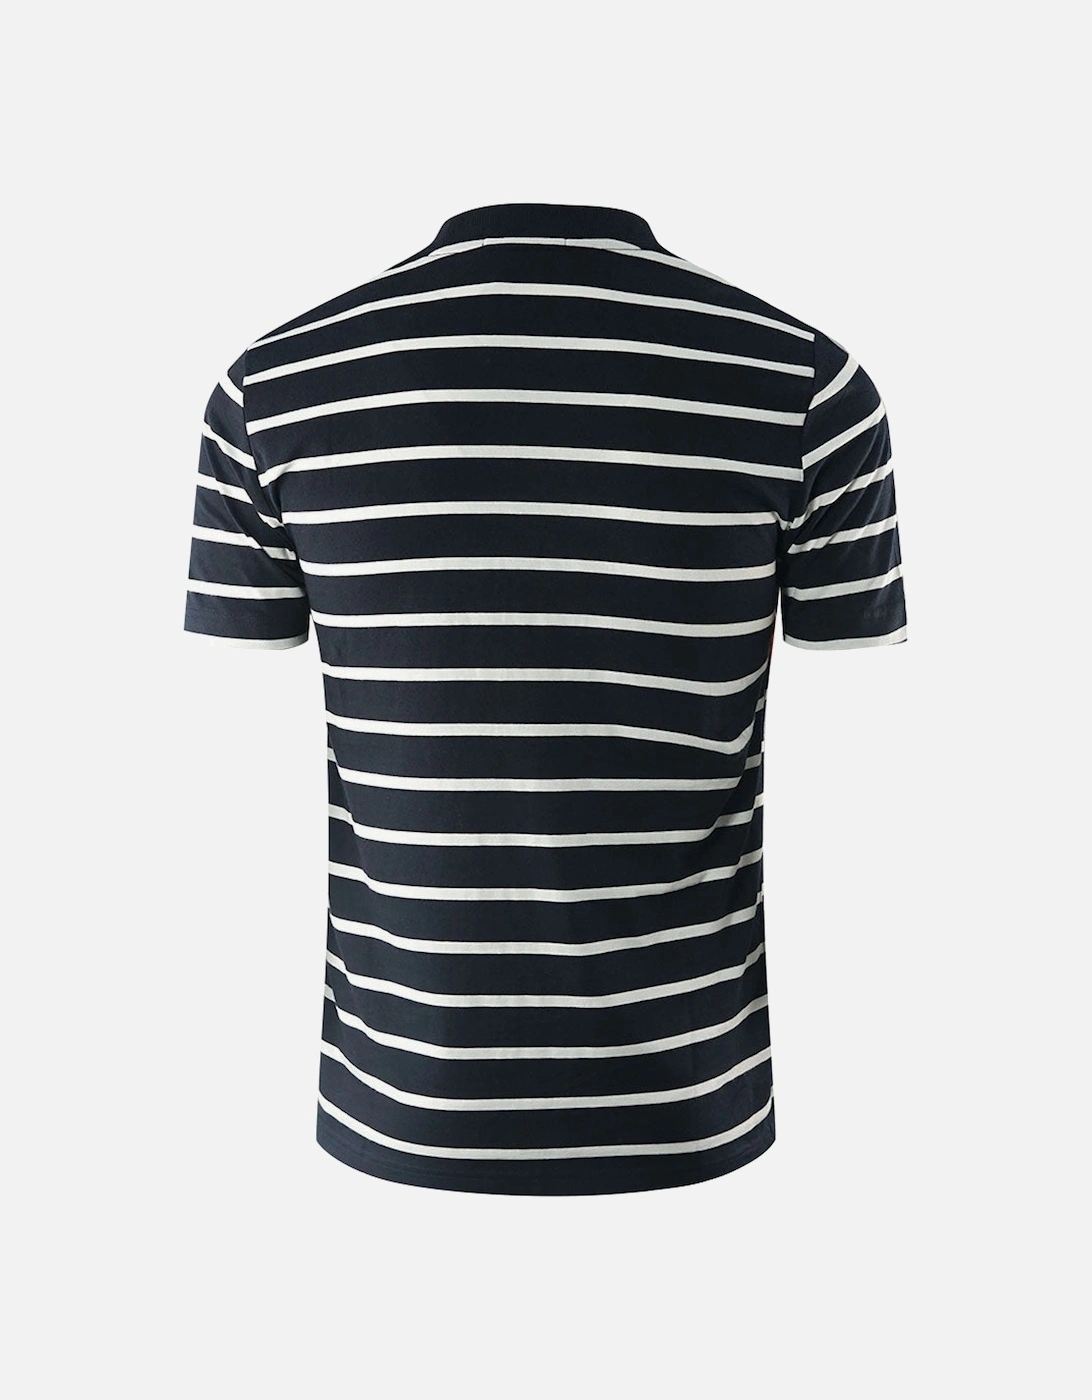 Embroidered Stripe Navy Blue T-Shirt